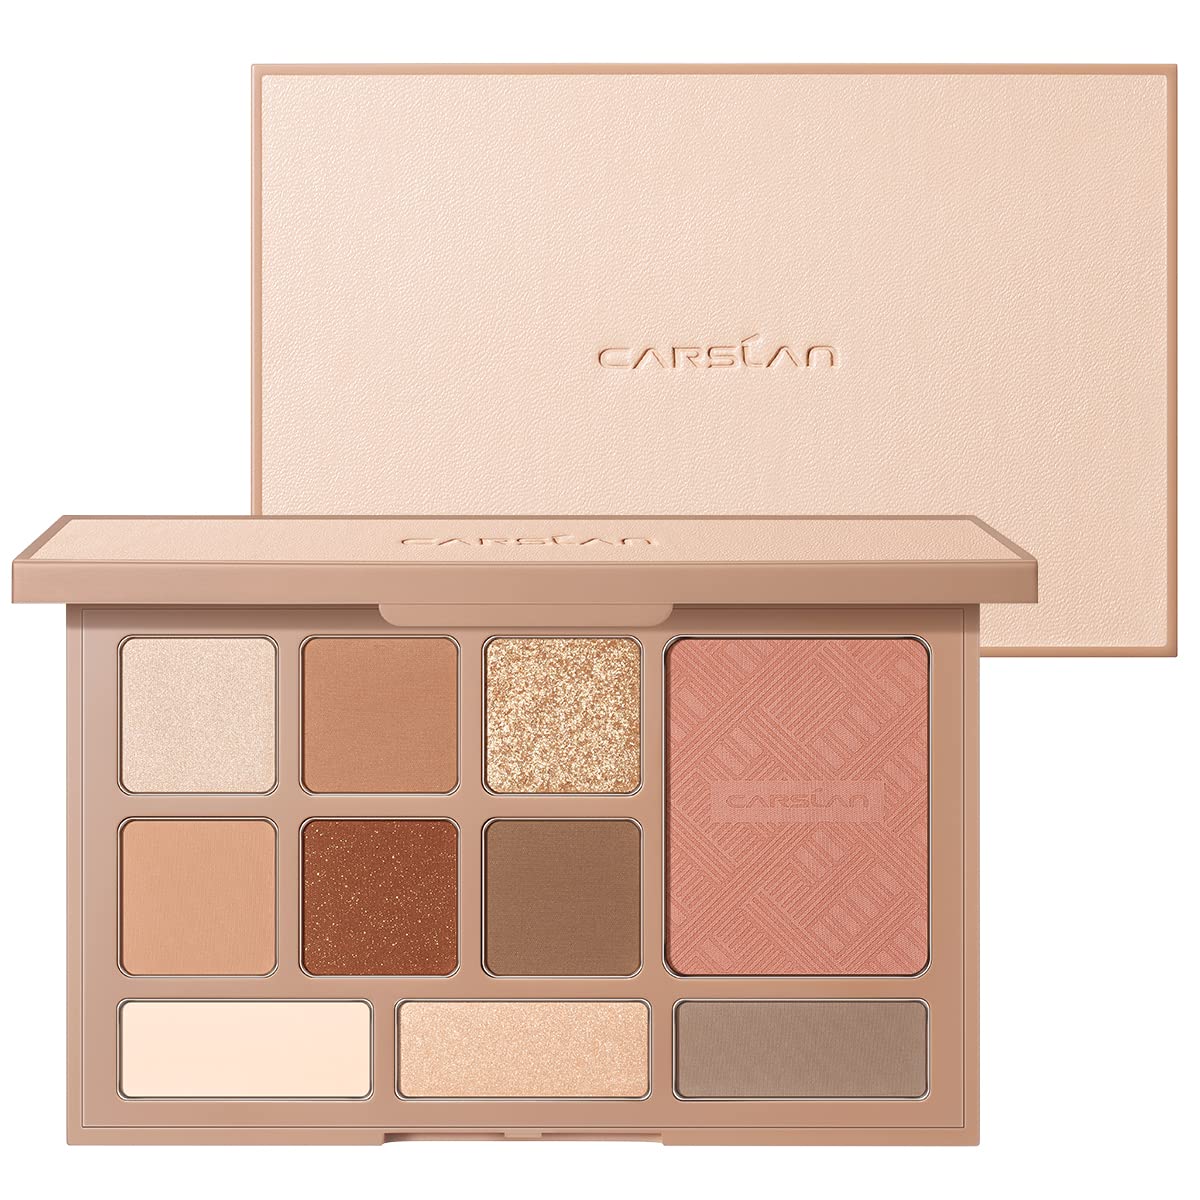 CARSLAN 10 Color Matte Shimmer Eyeshadow Palette, Highly Pigmented Nude Eye Shadow Makeup Palette with Warm Neutrals, Comprehensive palette 01, Coffee